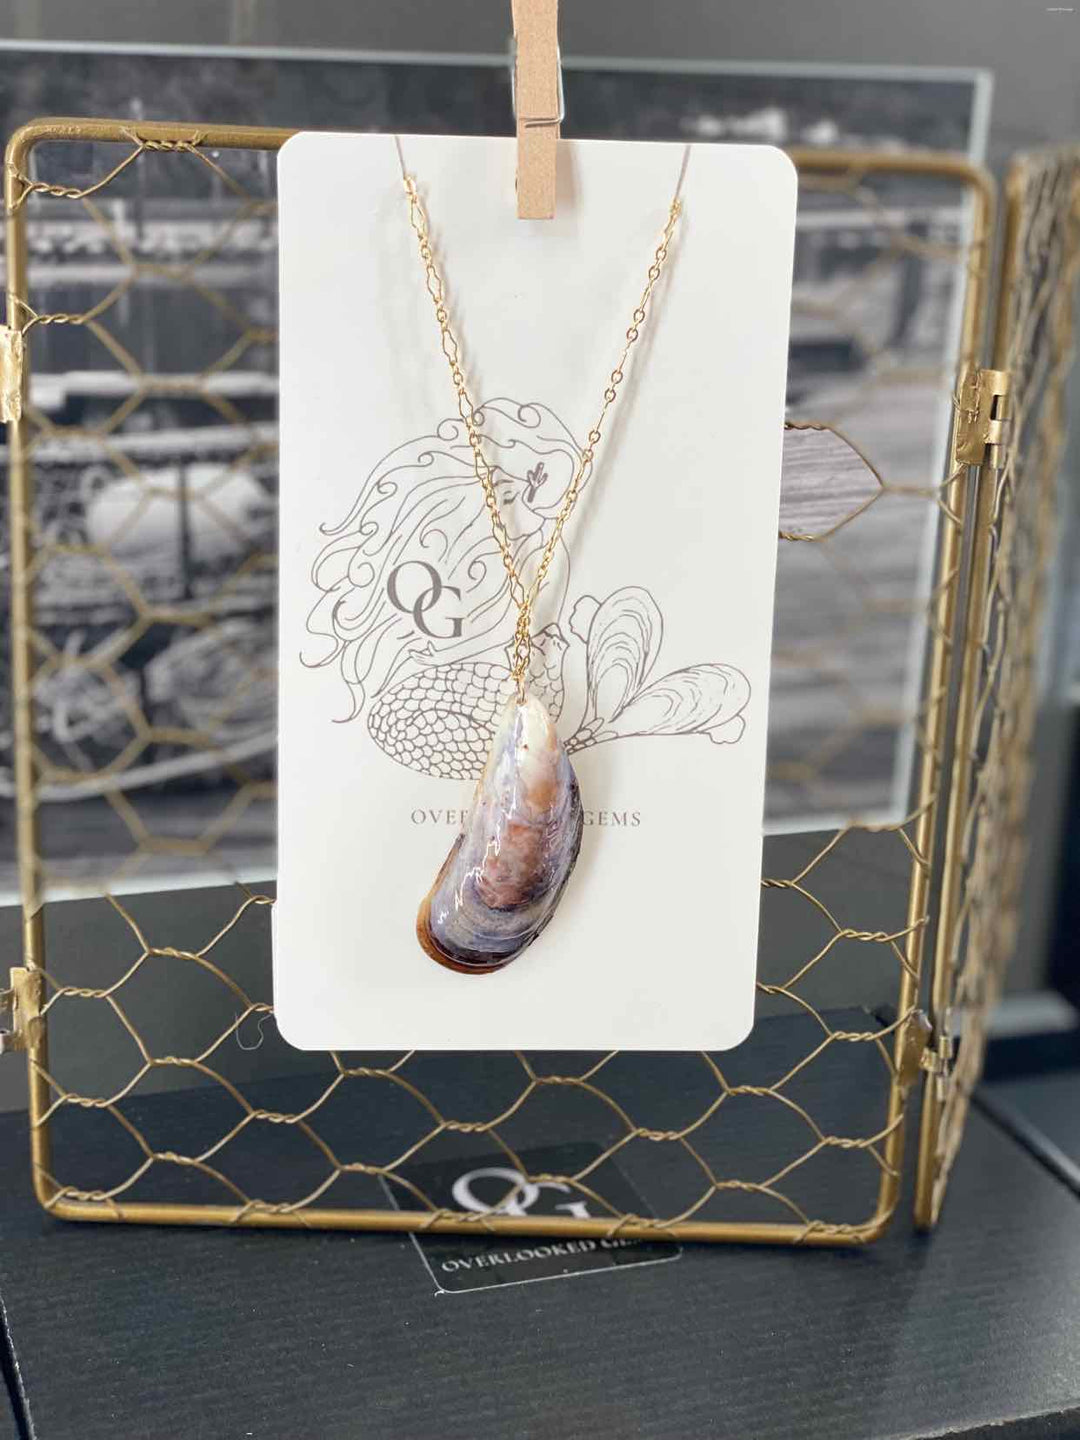 Overlooked Gems Necklace